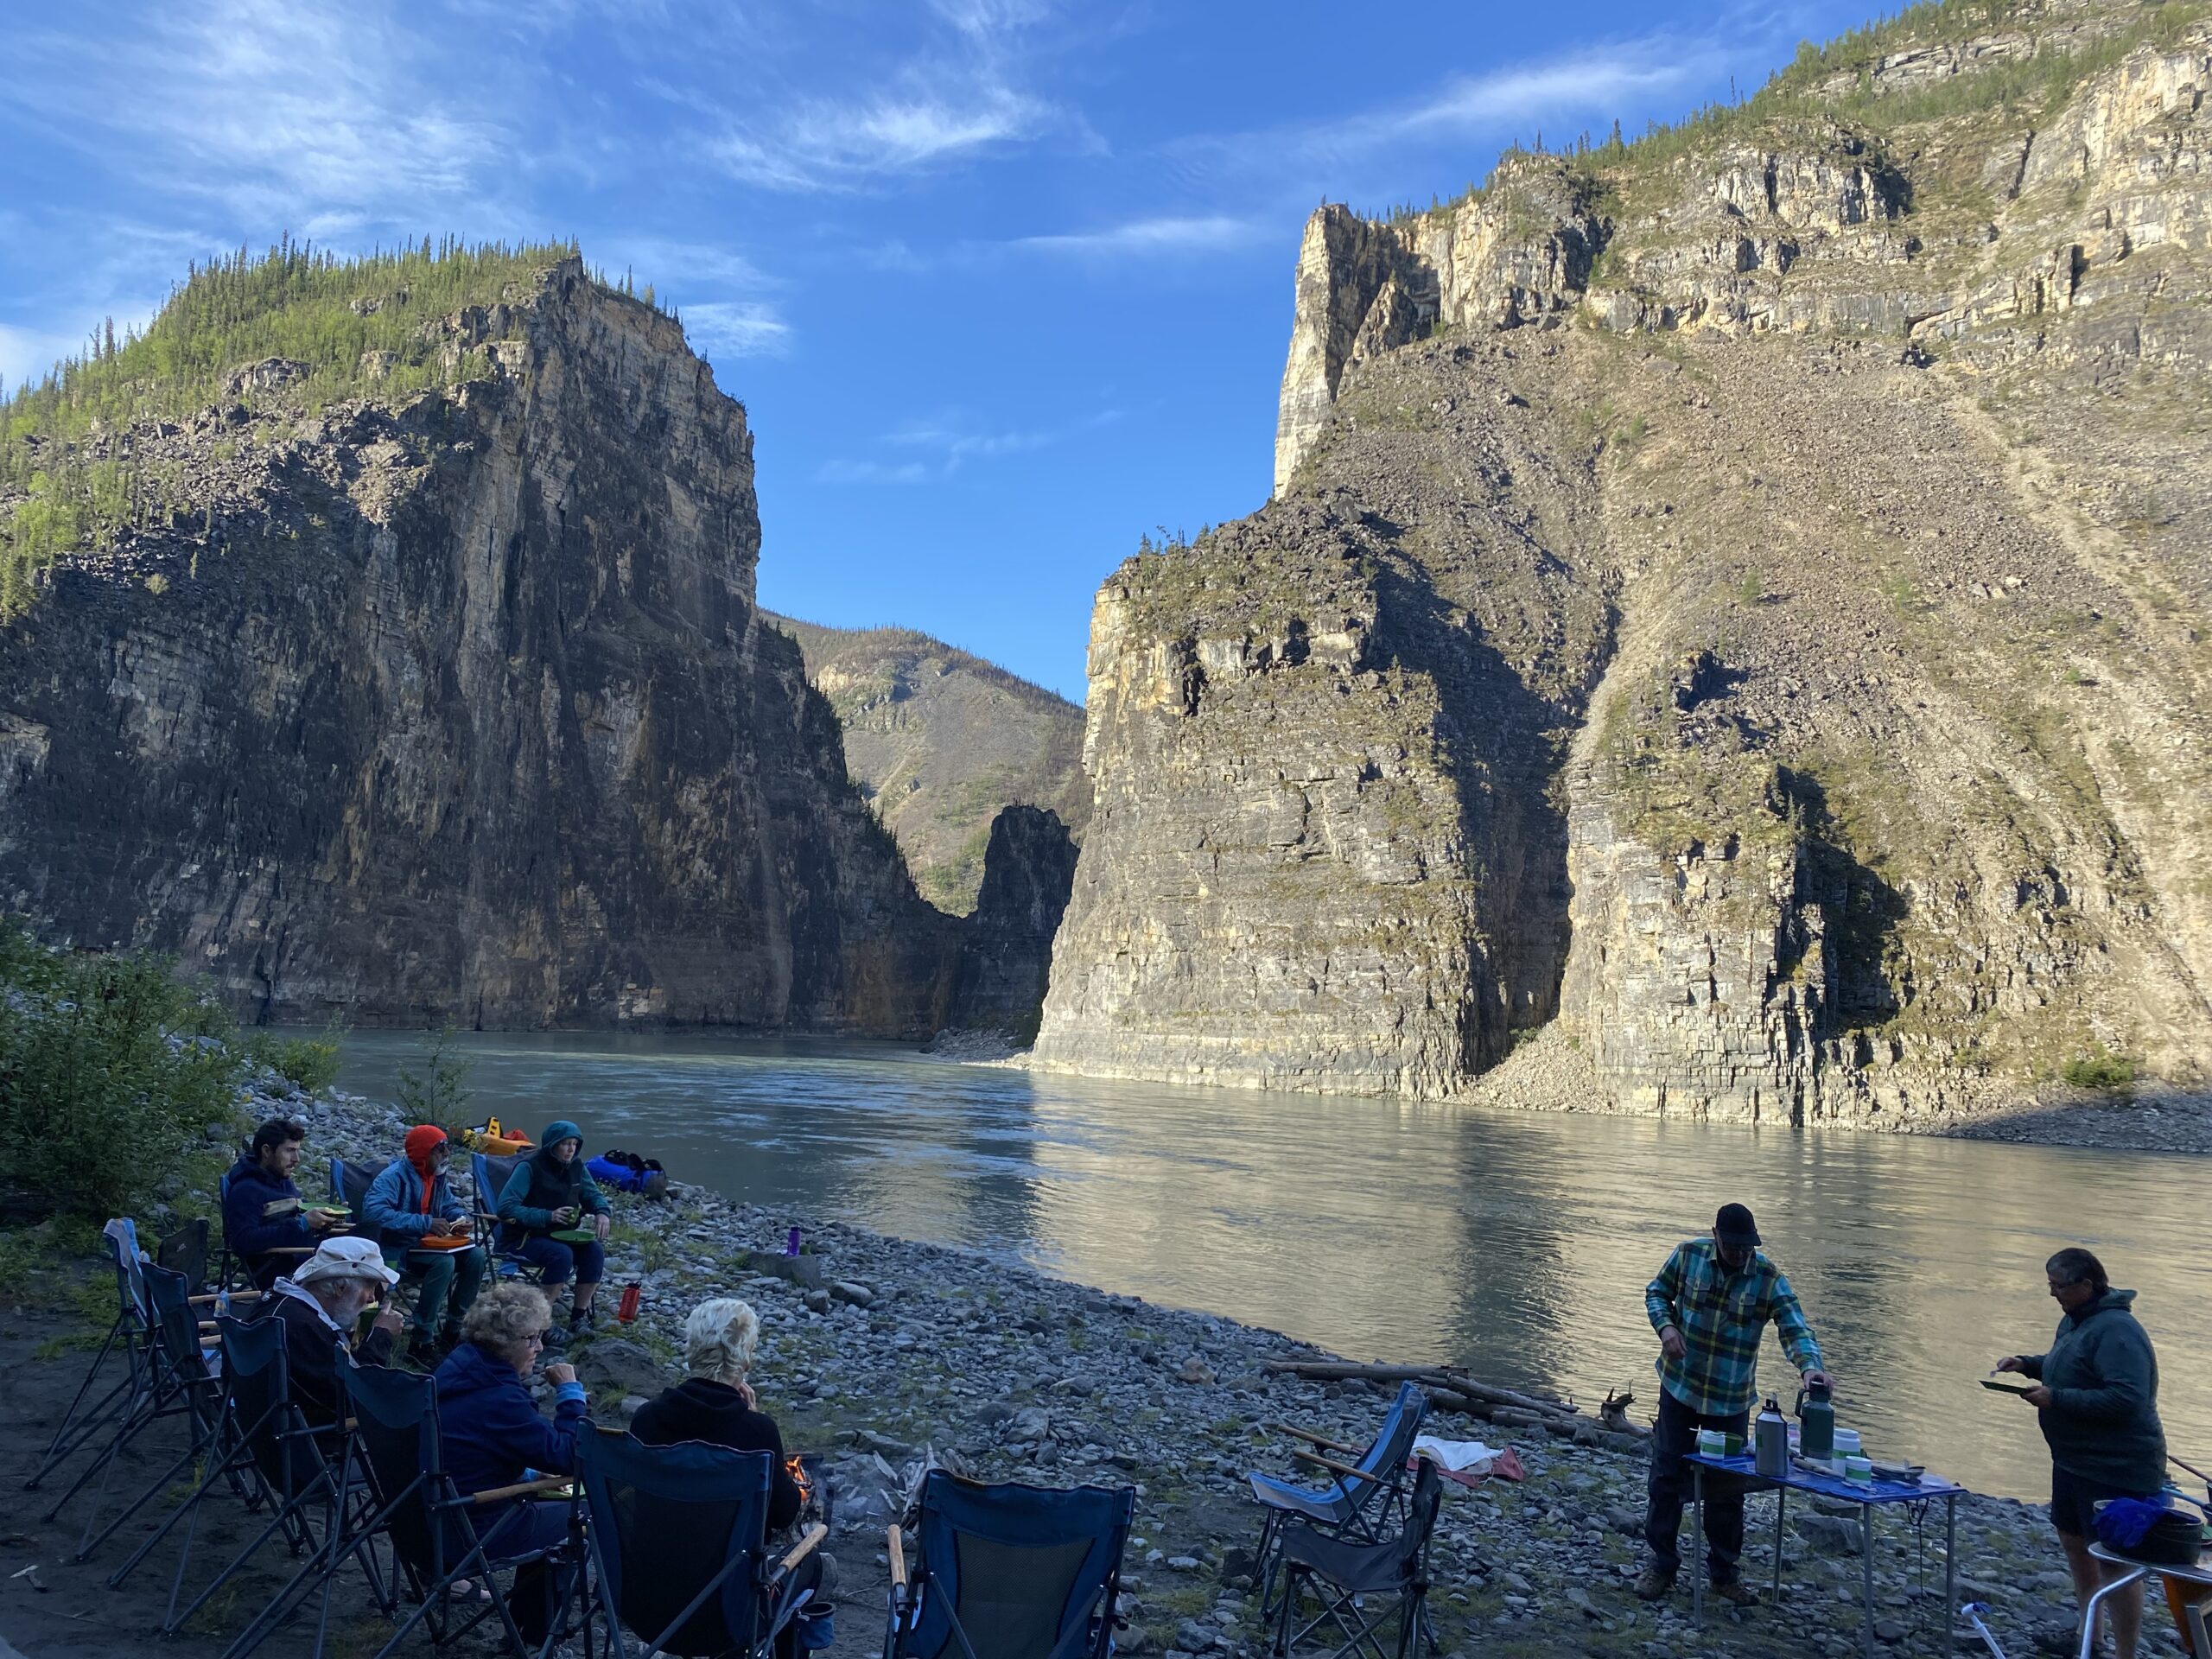 Sitting in Camp, Looking at the Gate, an imposing rock formation on the Nahanni River